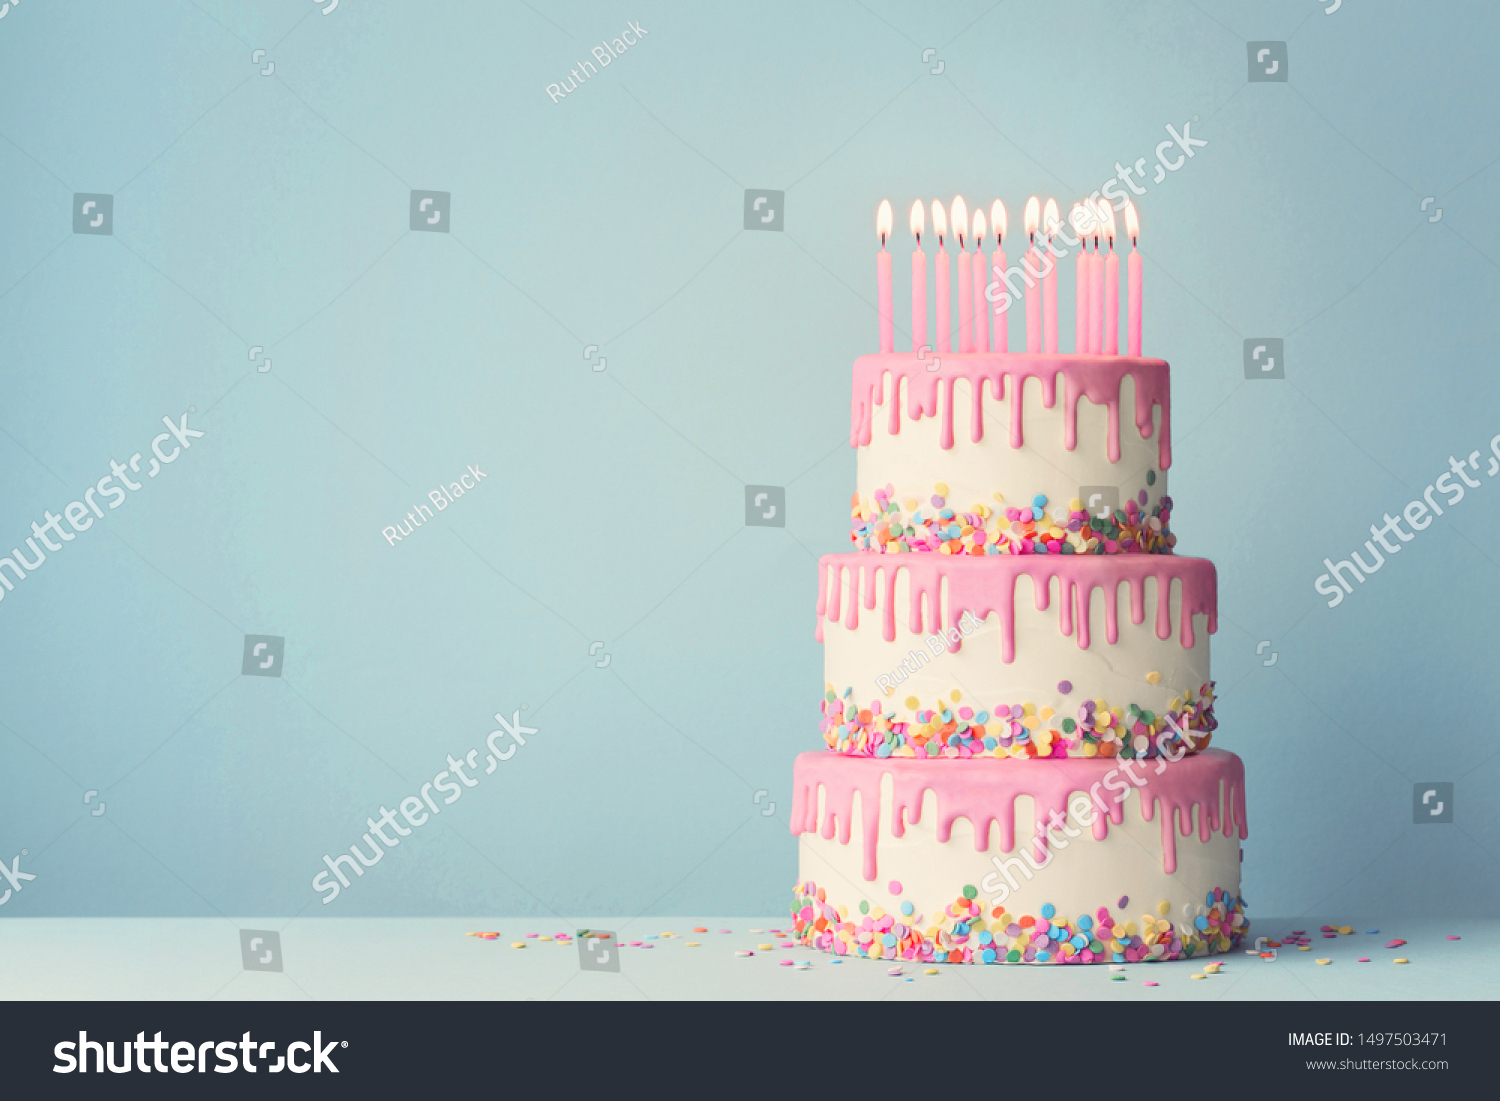 Tiered birthday cake with drip frosting and twelve candles #1497503471